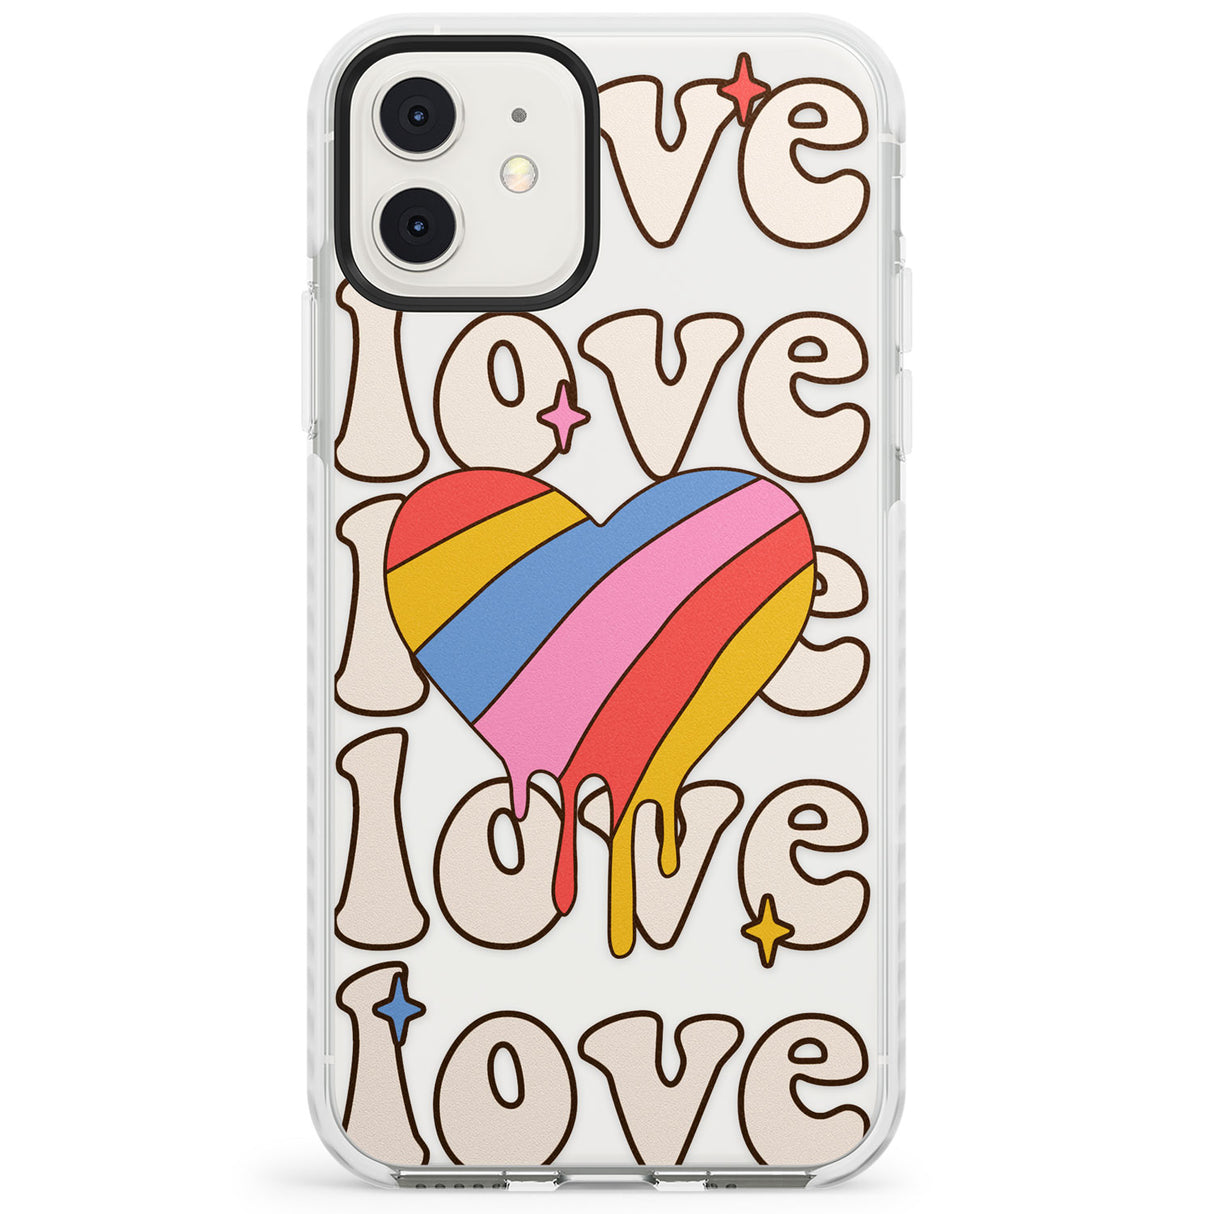 Groovy Love Impact Phone Case for iPhone 11, iphone 12